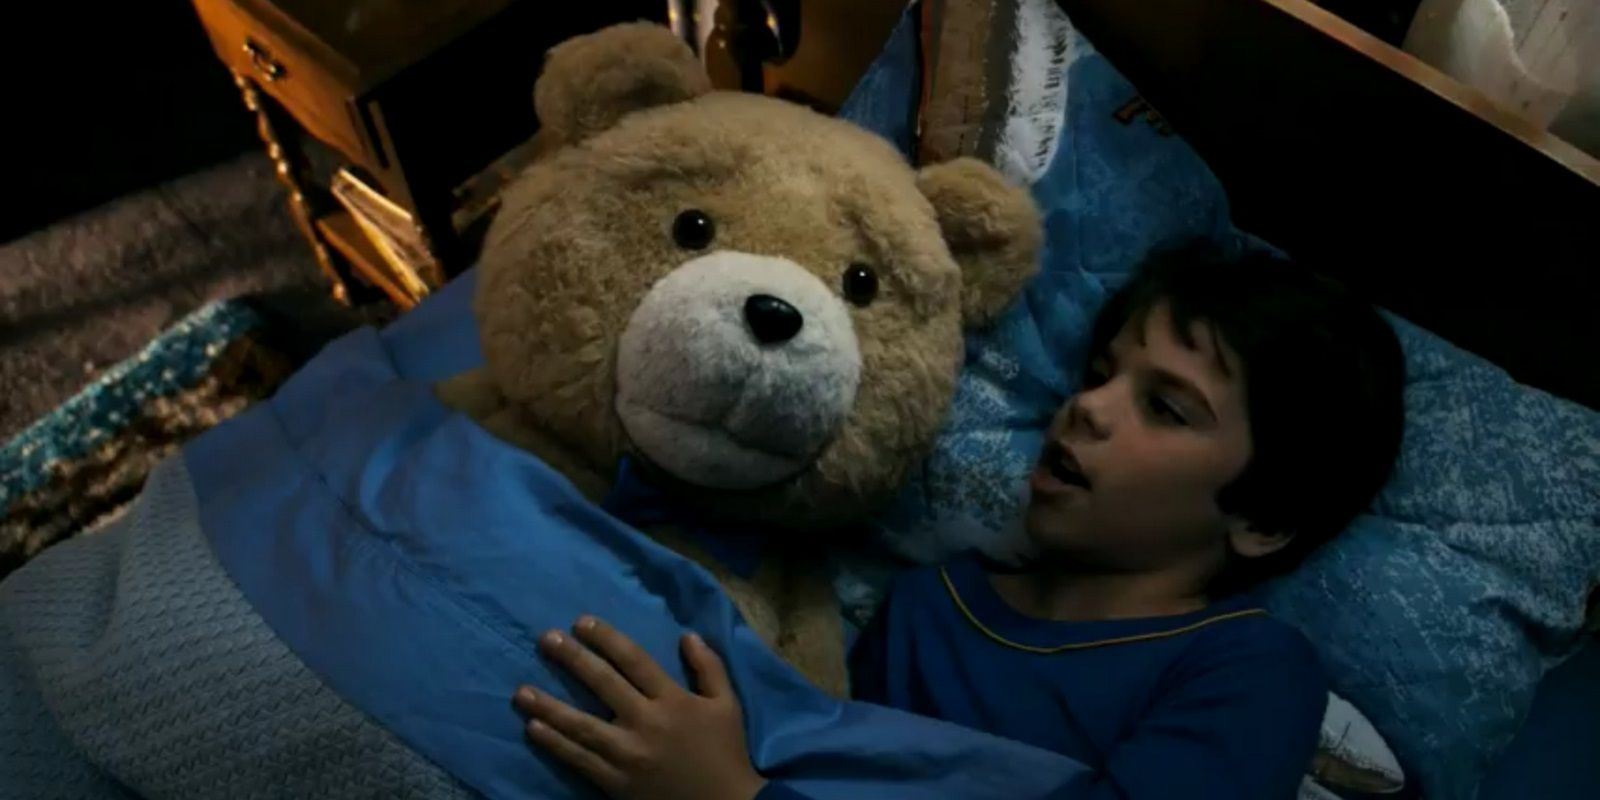 Young John with Ted on Christmas in Ted